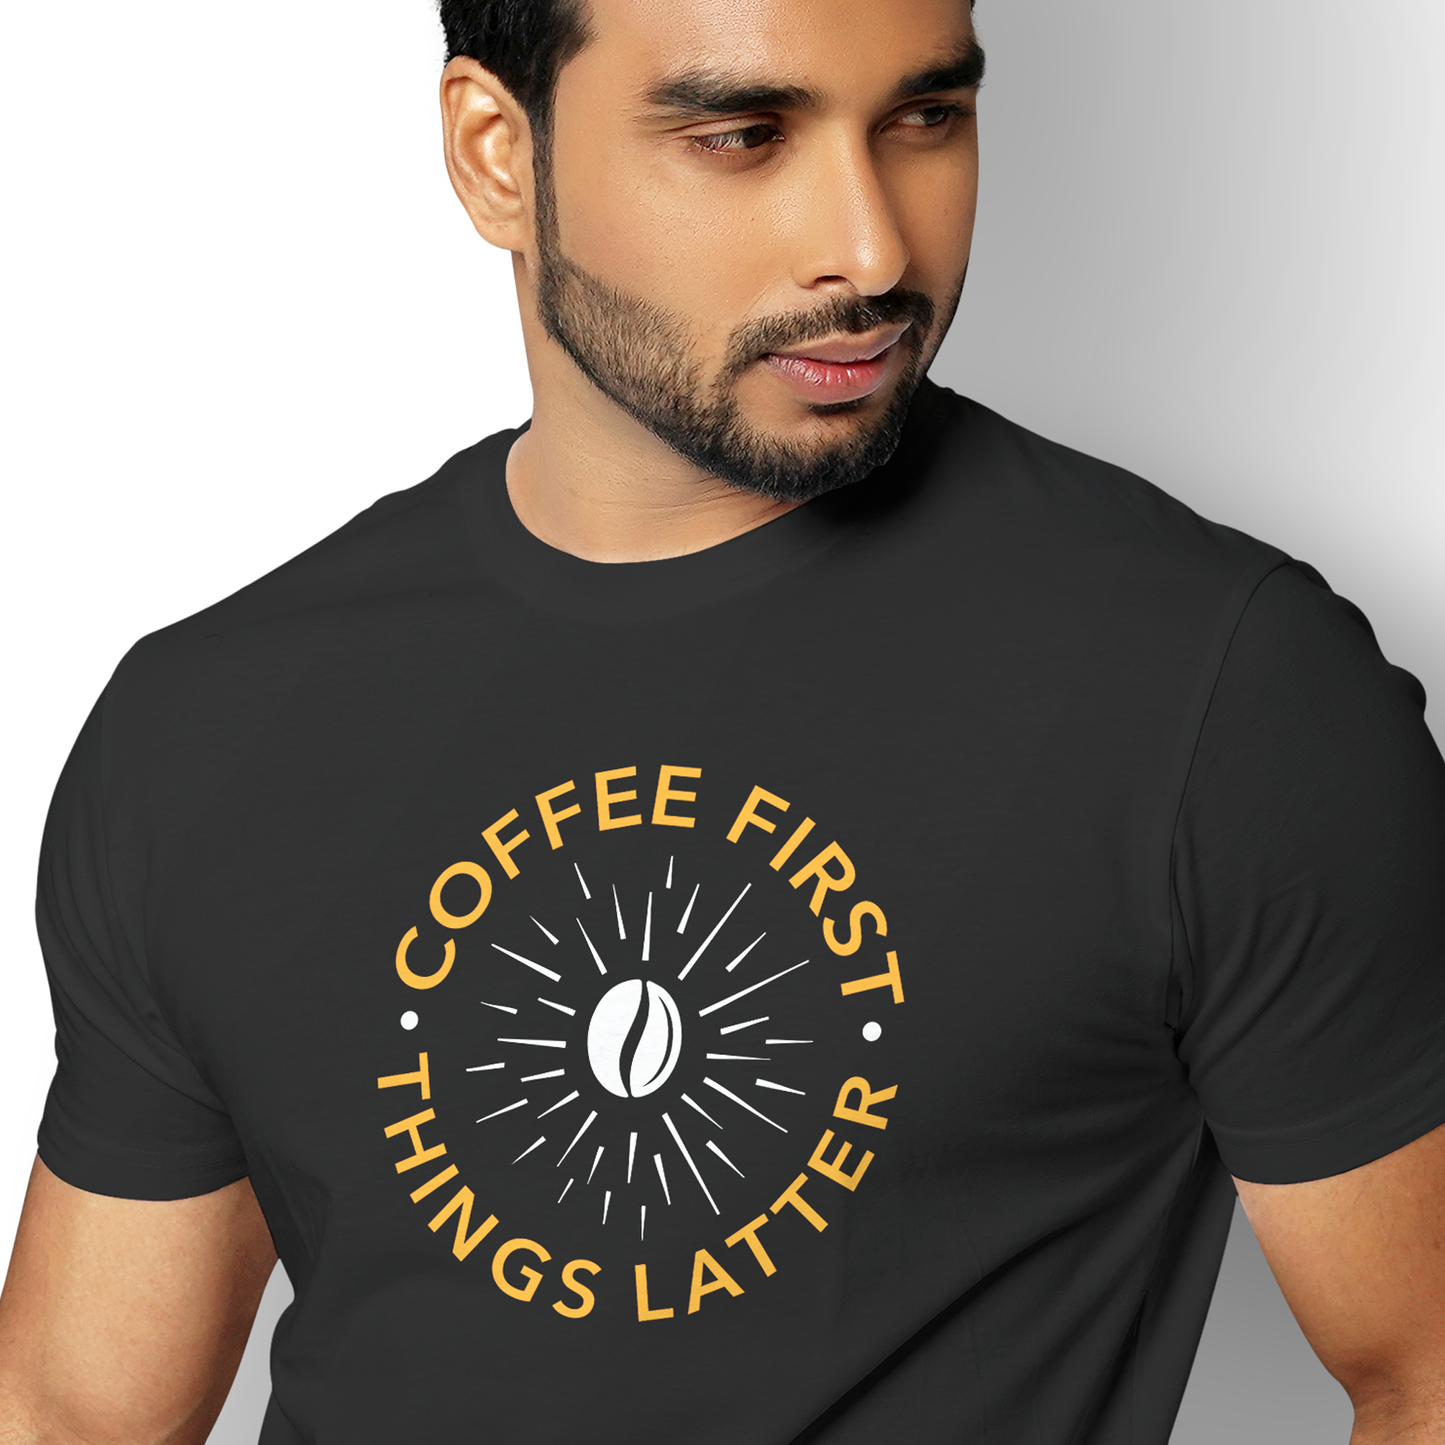 "Coffee First, Things Later!" Tee